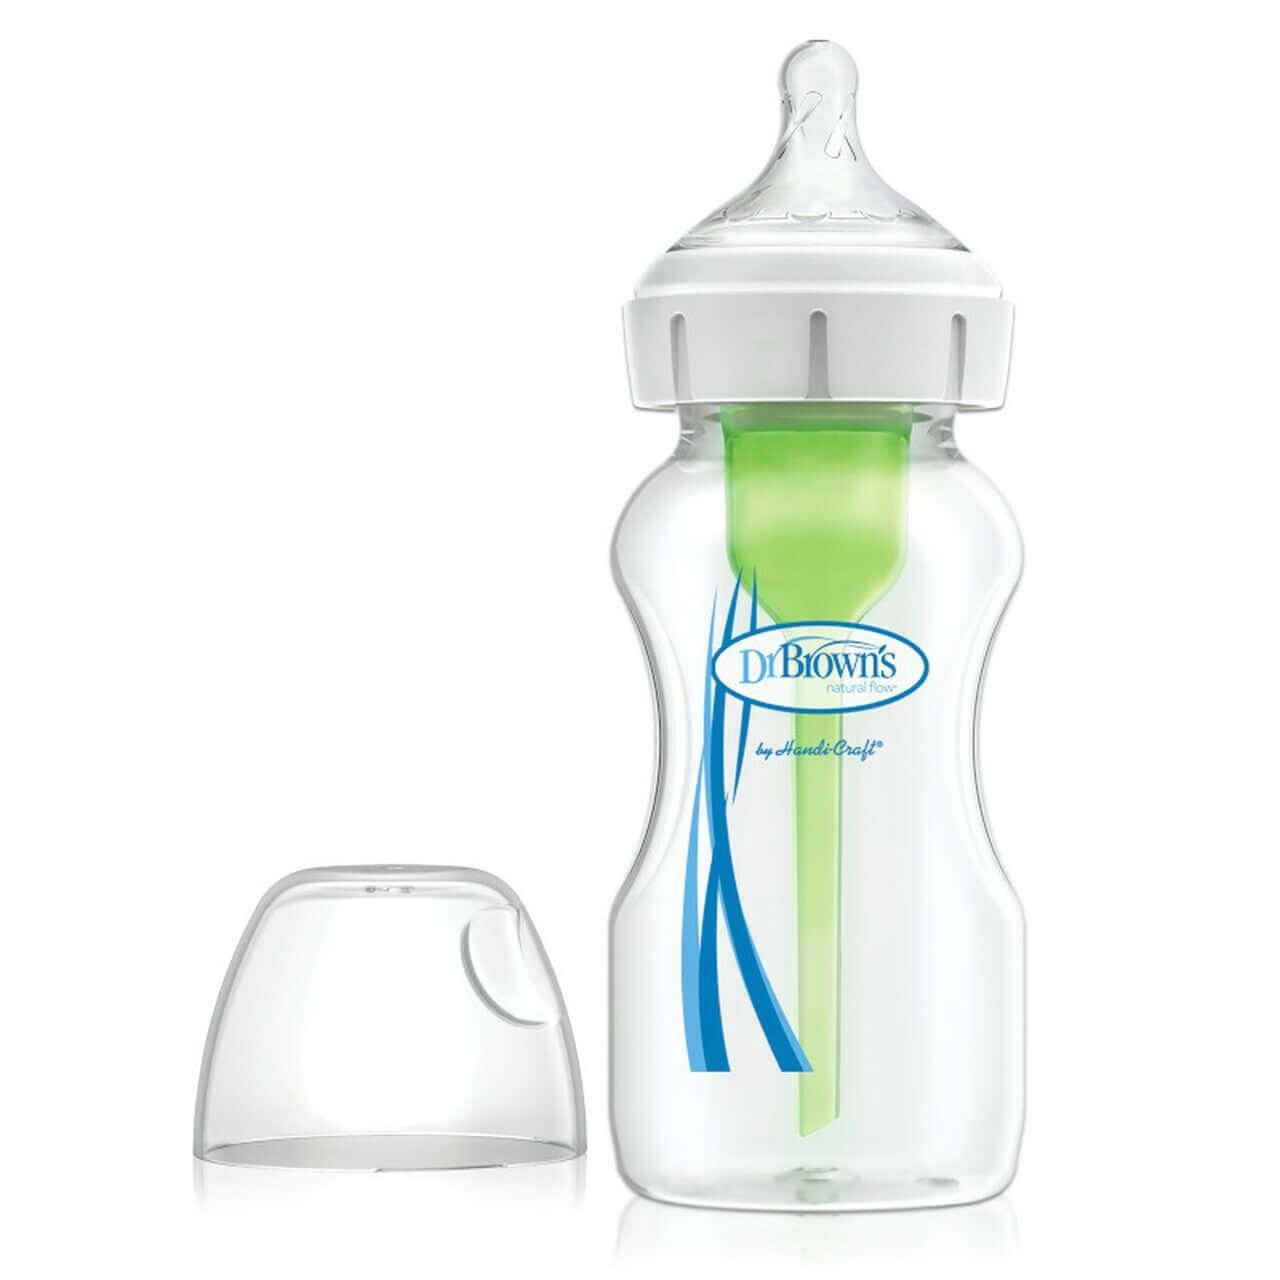 Dr Browns Options+ Anti-Colic Bottle, 270ml - Ourkids - Dr. Brown's